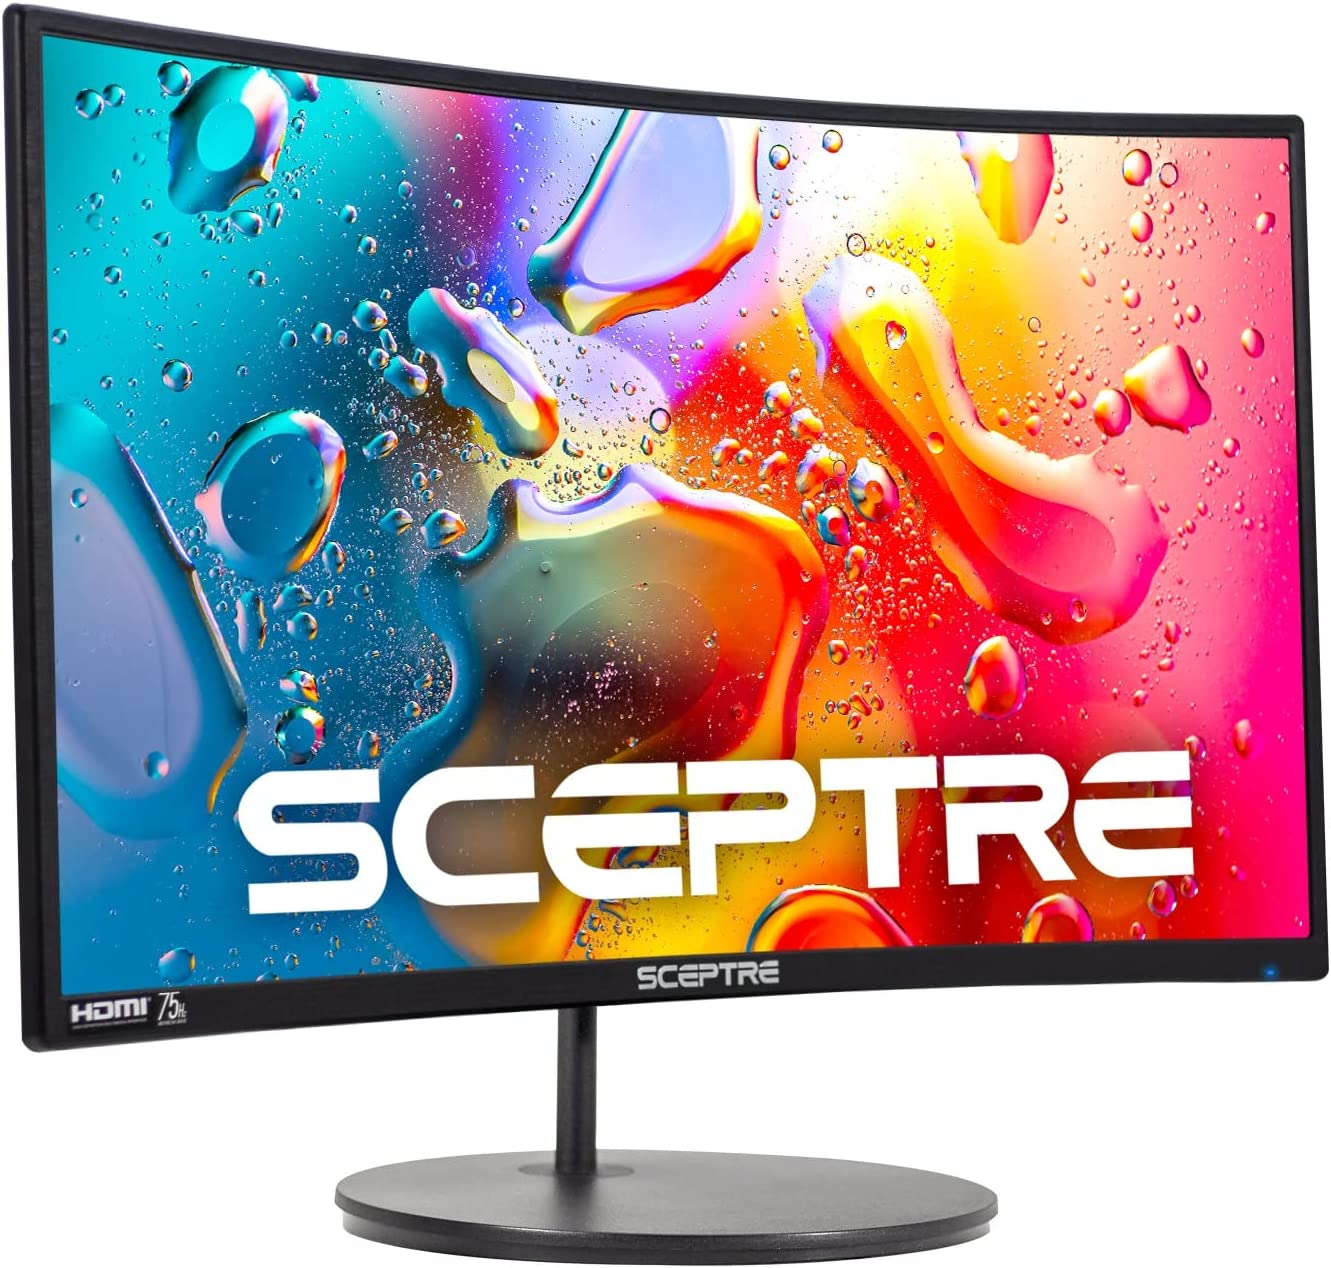 Sceptre Curved 24-inch Gaming Monitor 1080p R1500 98% [...]